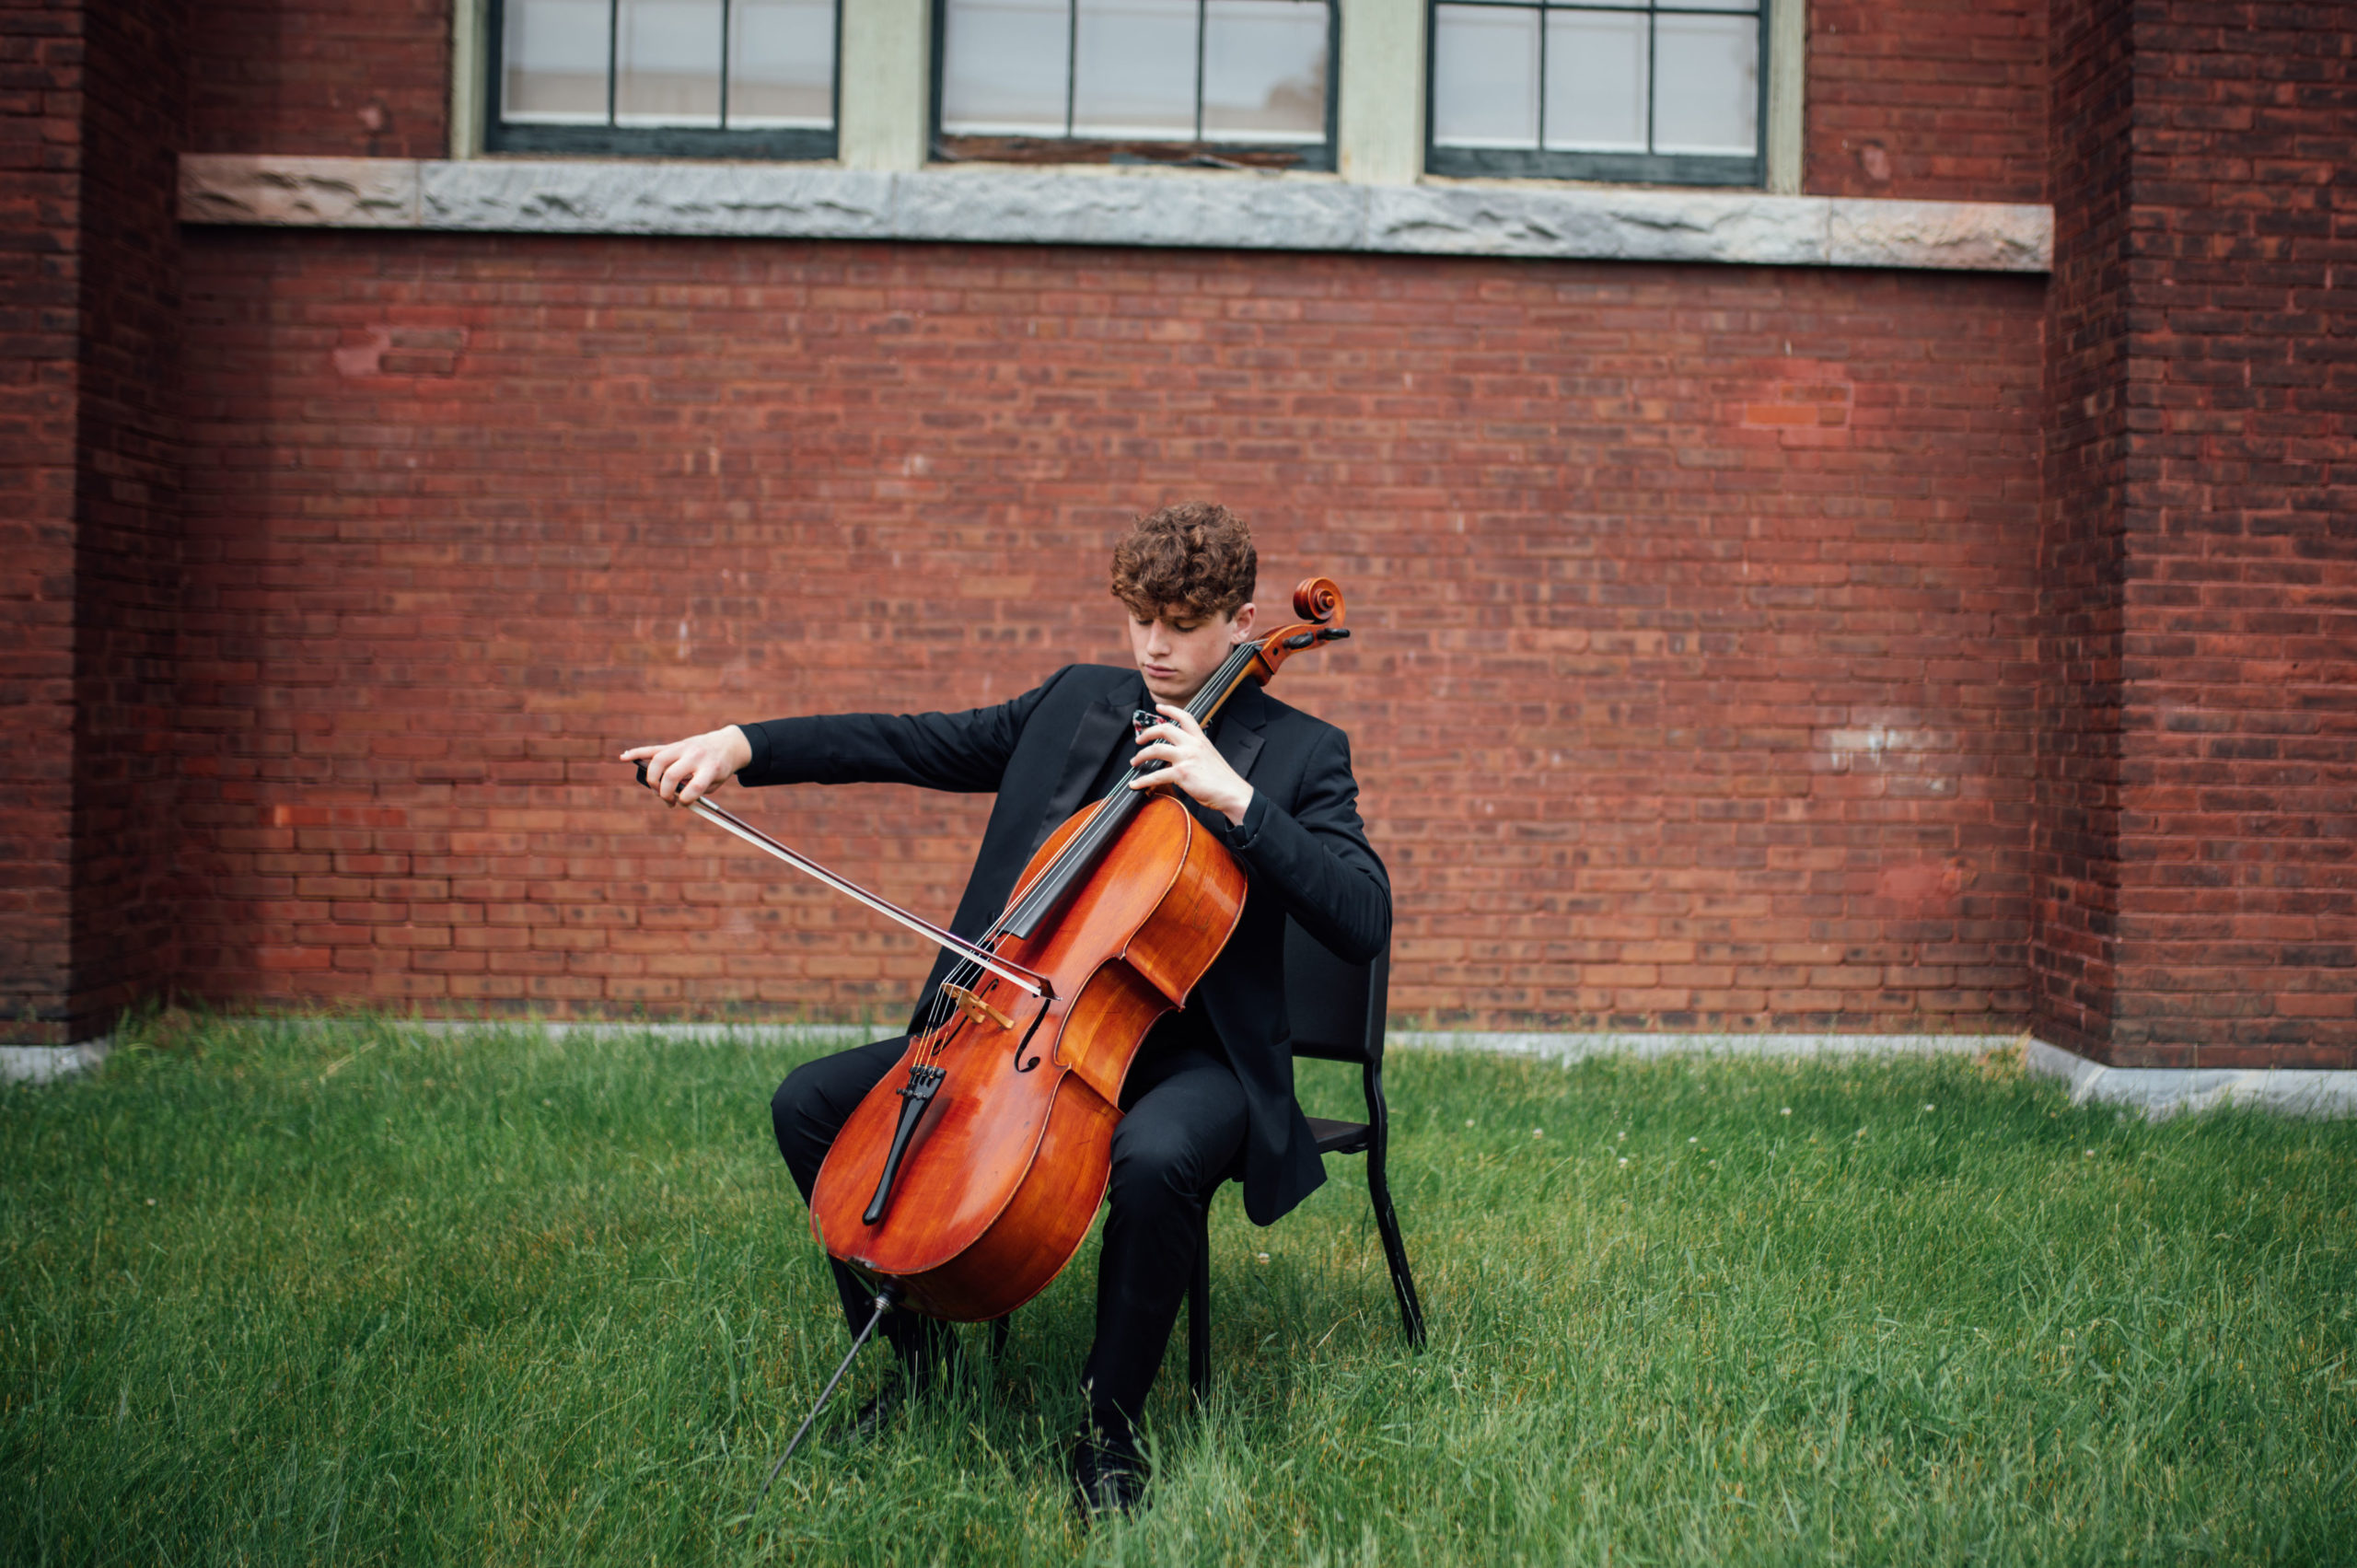 VYOA student musician is seated in front of a brick wall with cello, bow poised to play.